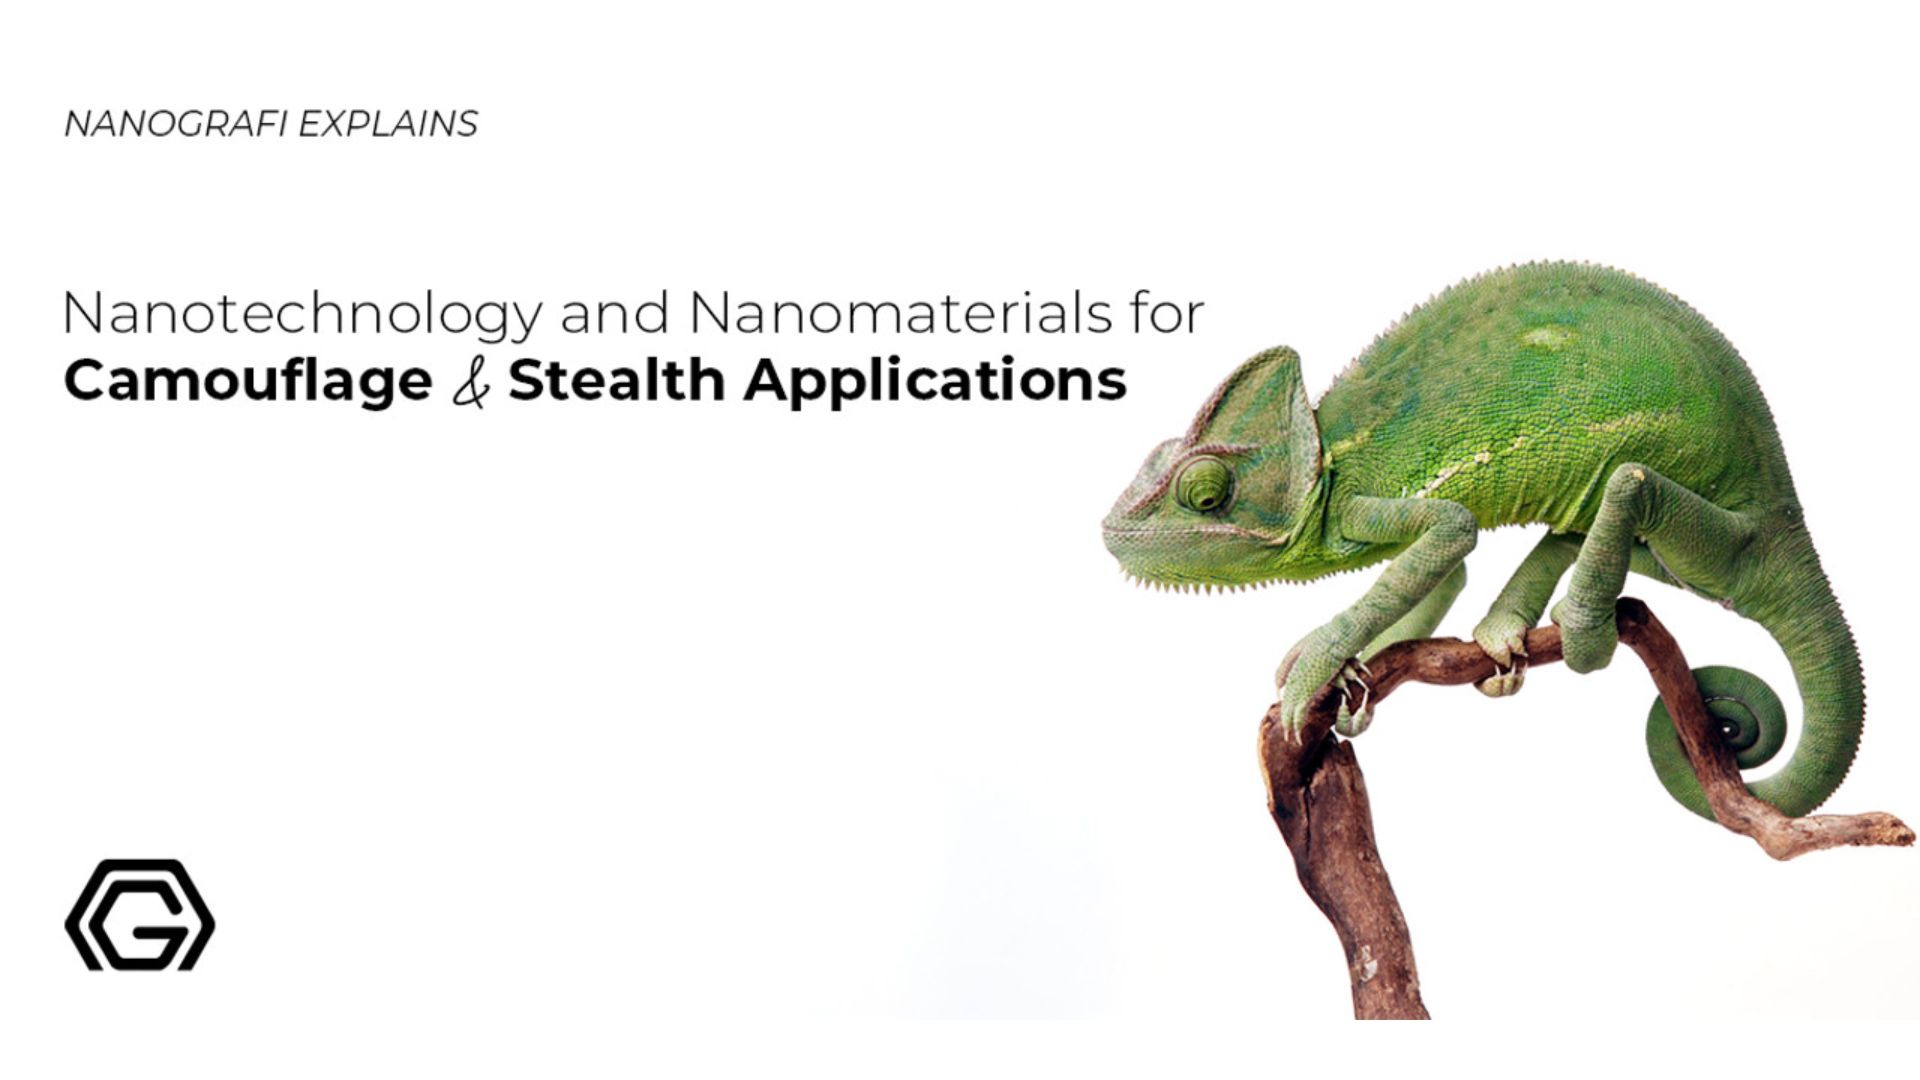 Nanotechnology and nanomaterials for camouflage and stealth applications